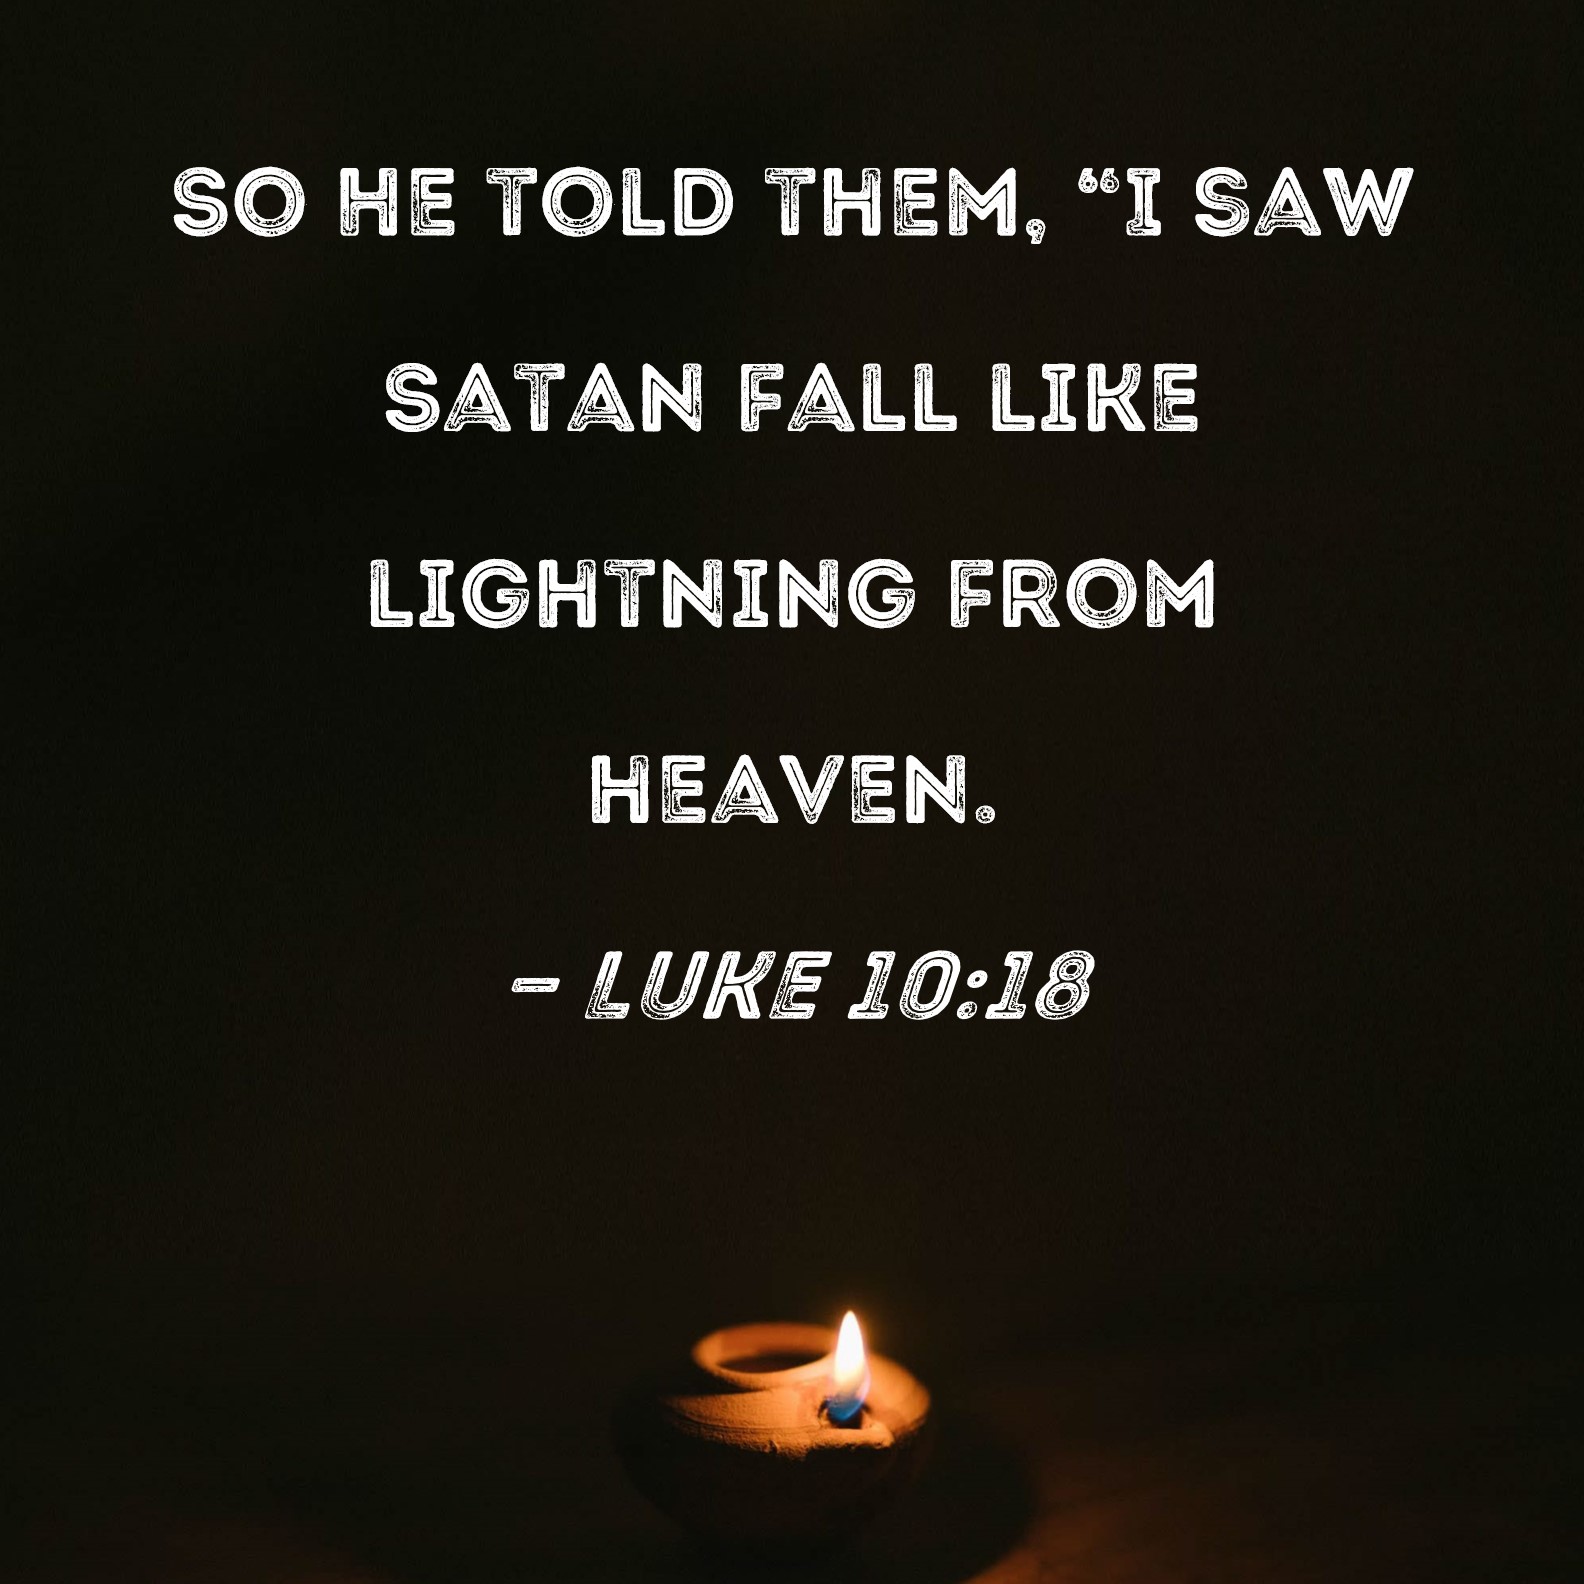 50 Epic Bible Verses About Lucifer (Fall From Heaven) Why?